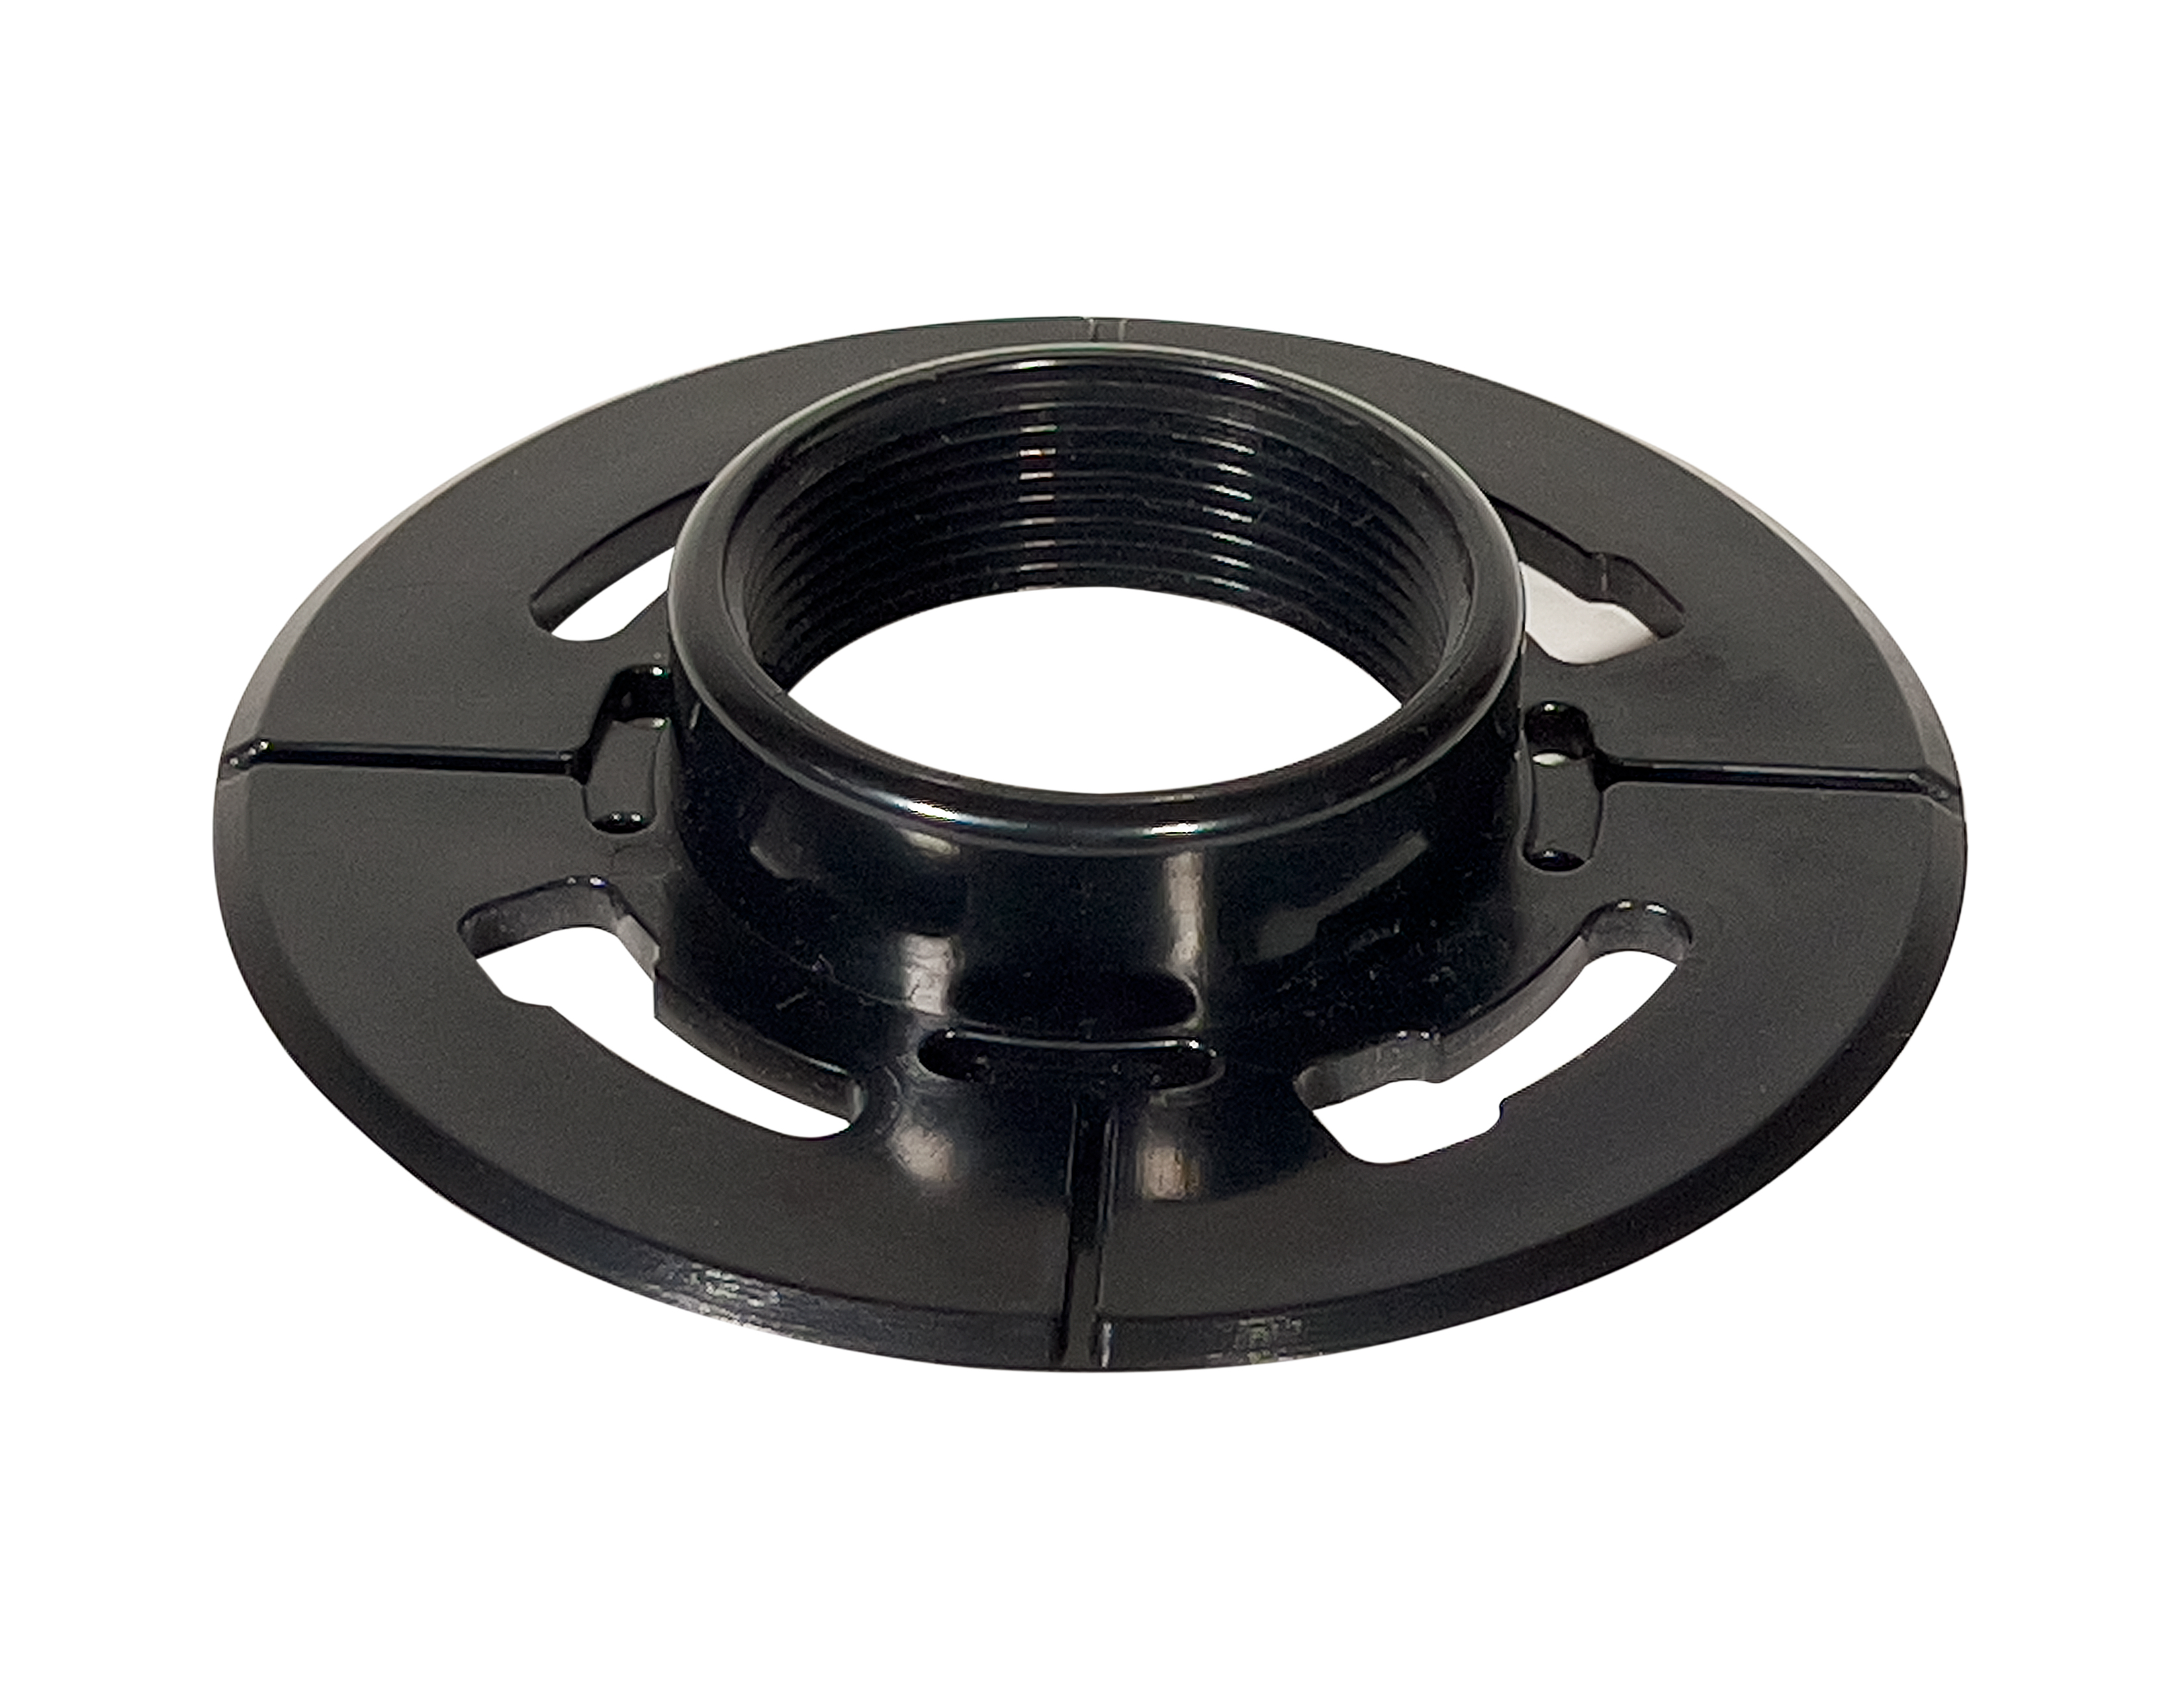 Clamping Flange bottomThreaded2